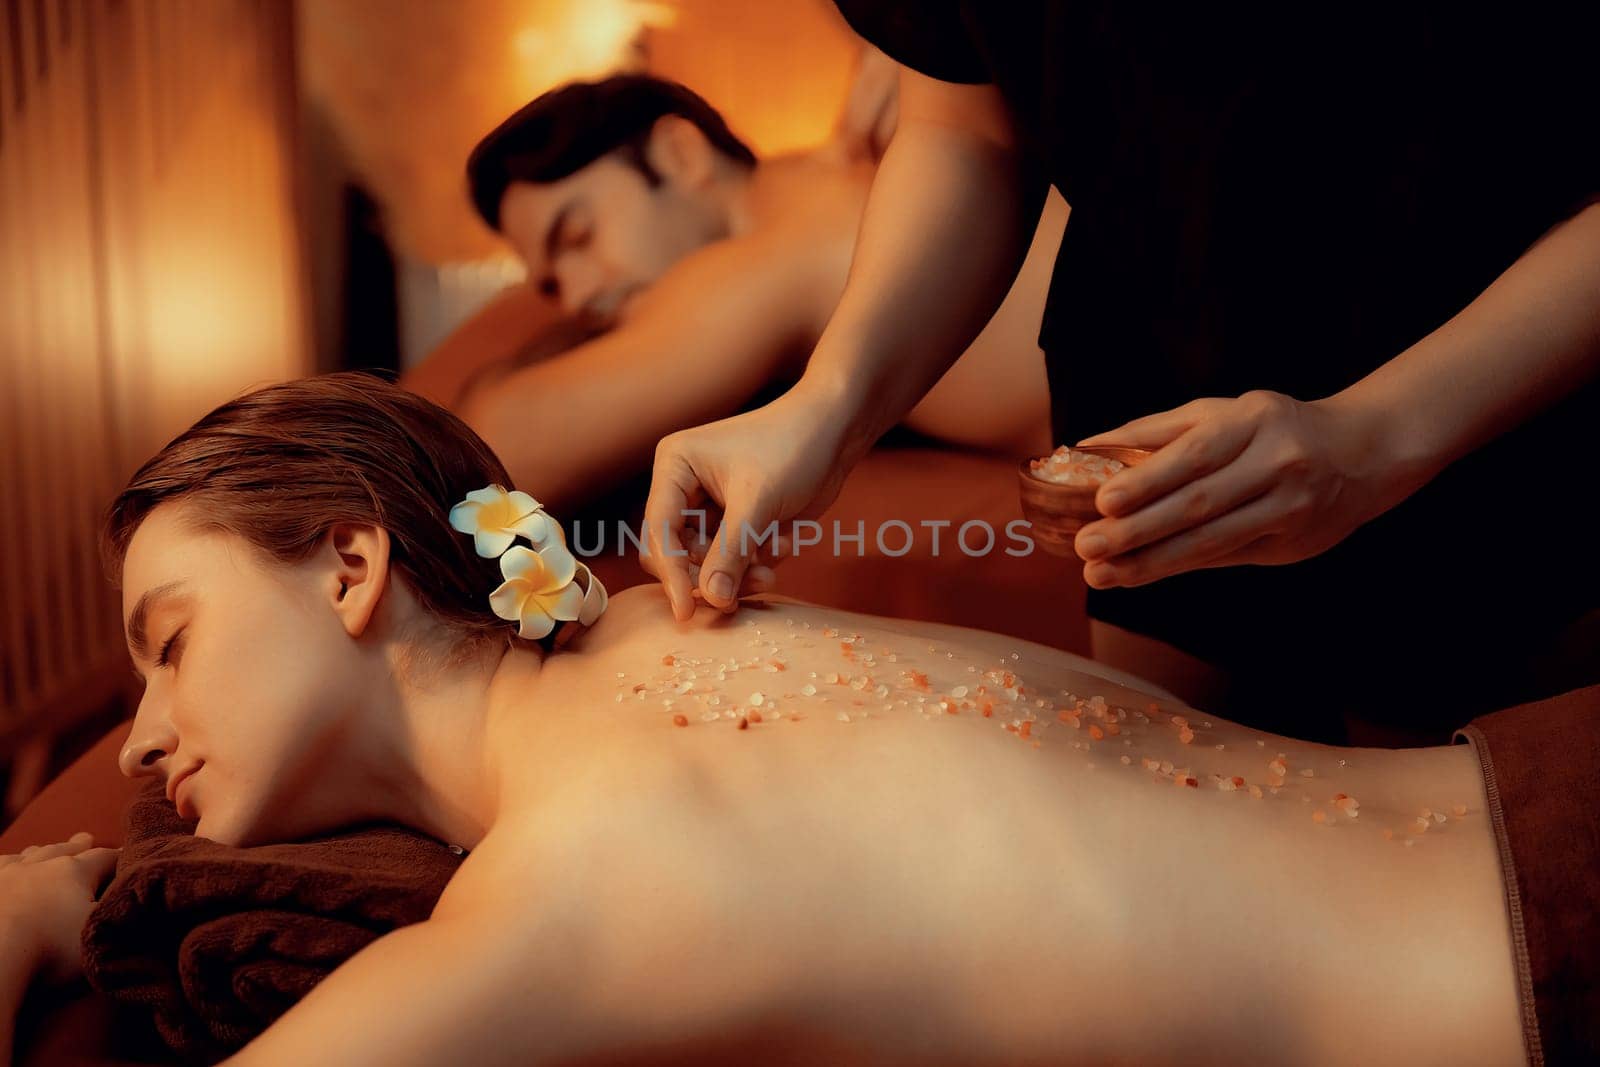 Couple customer having exfoliation treatment in luxury spa salon with warmth candle light ambient. Salt scrub beauty treatment in Health spa body scrub. Quiescent